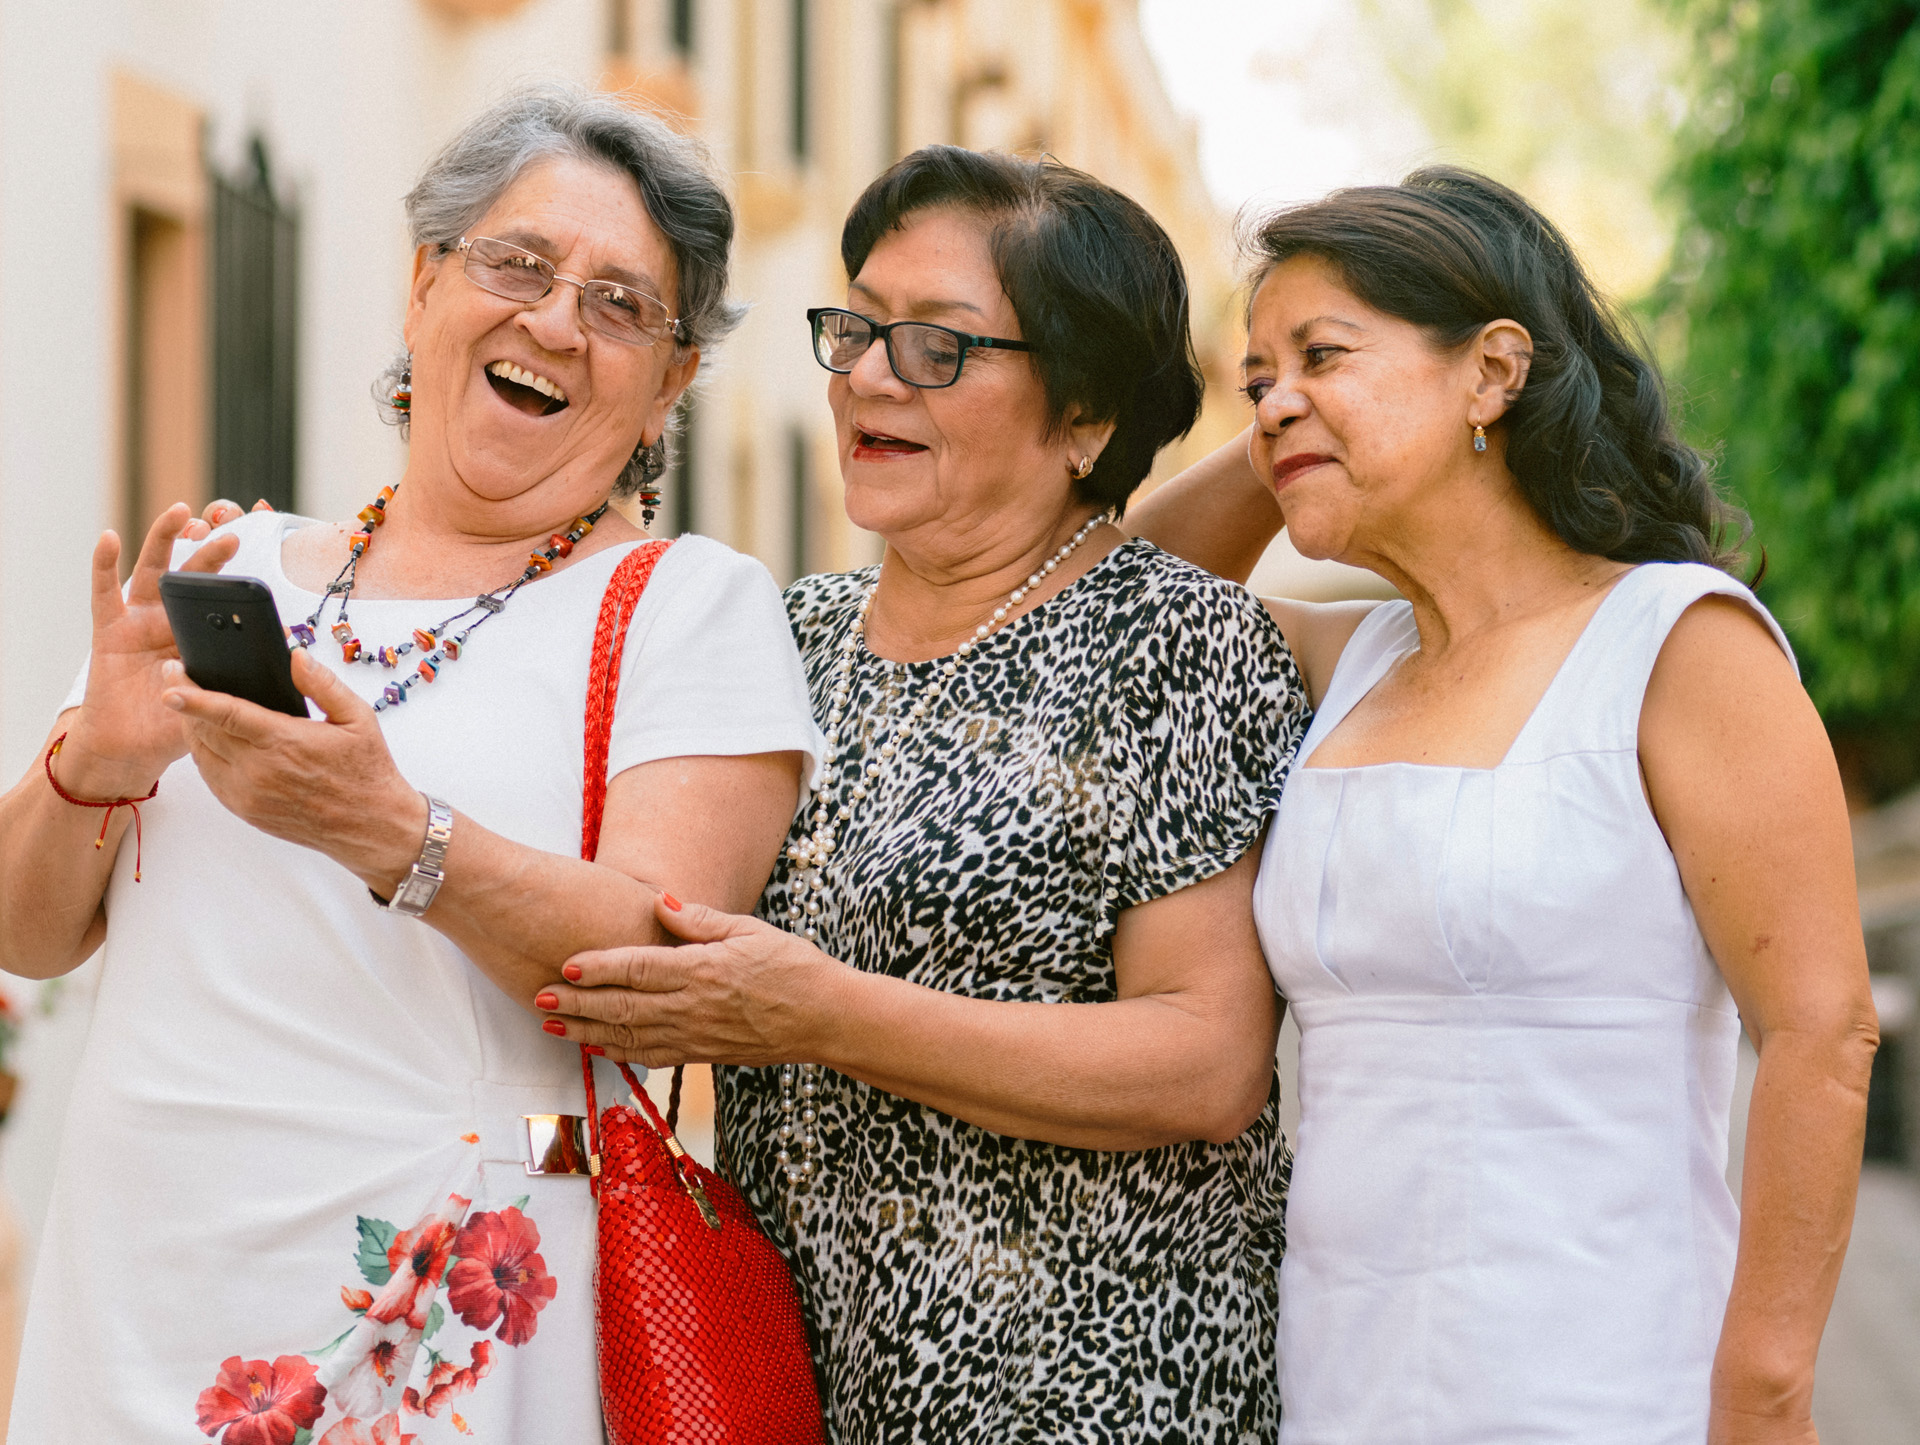 Photo of 3 women smiling while looking at a phone